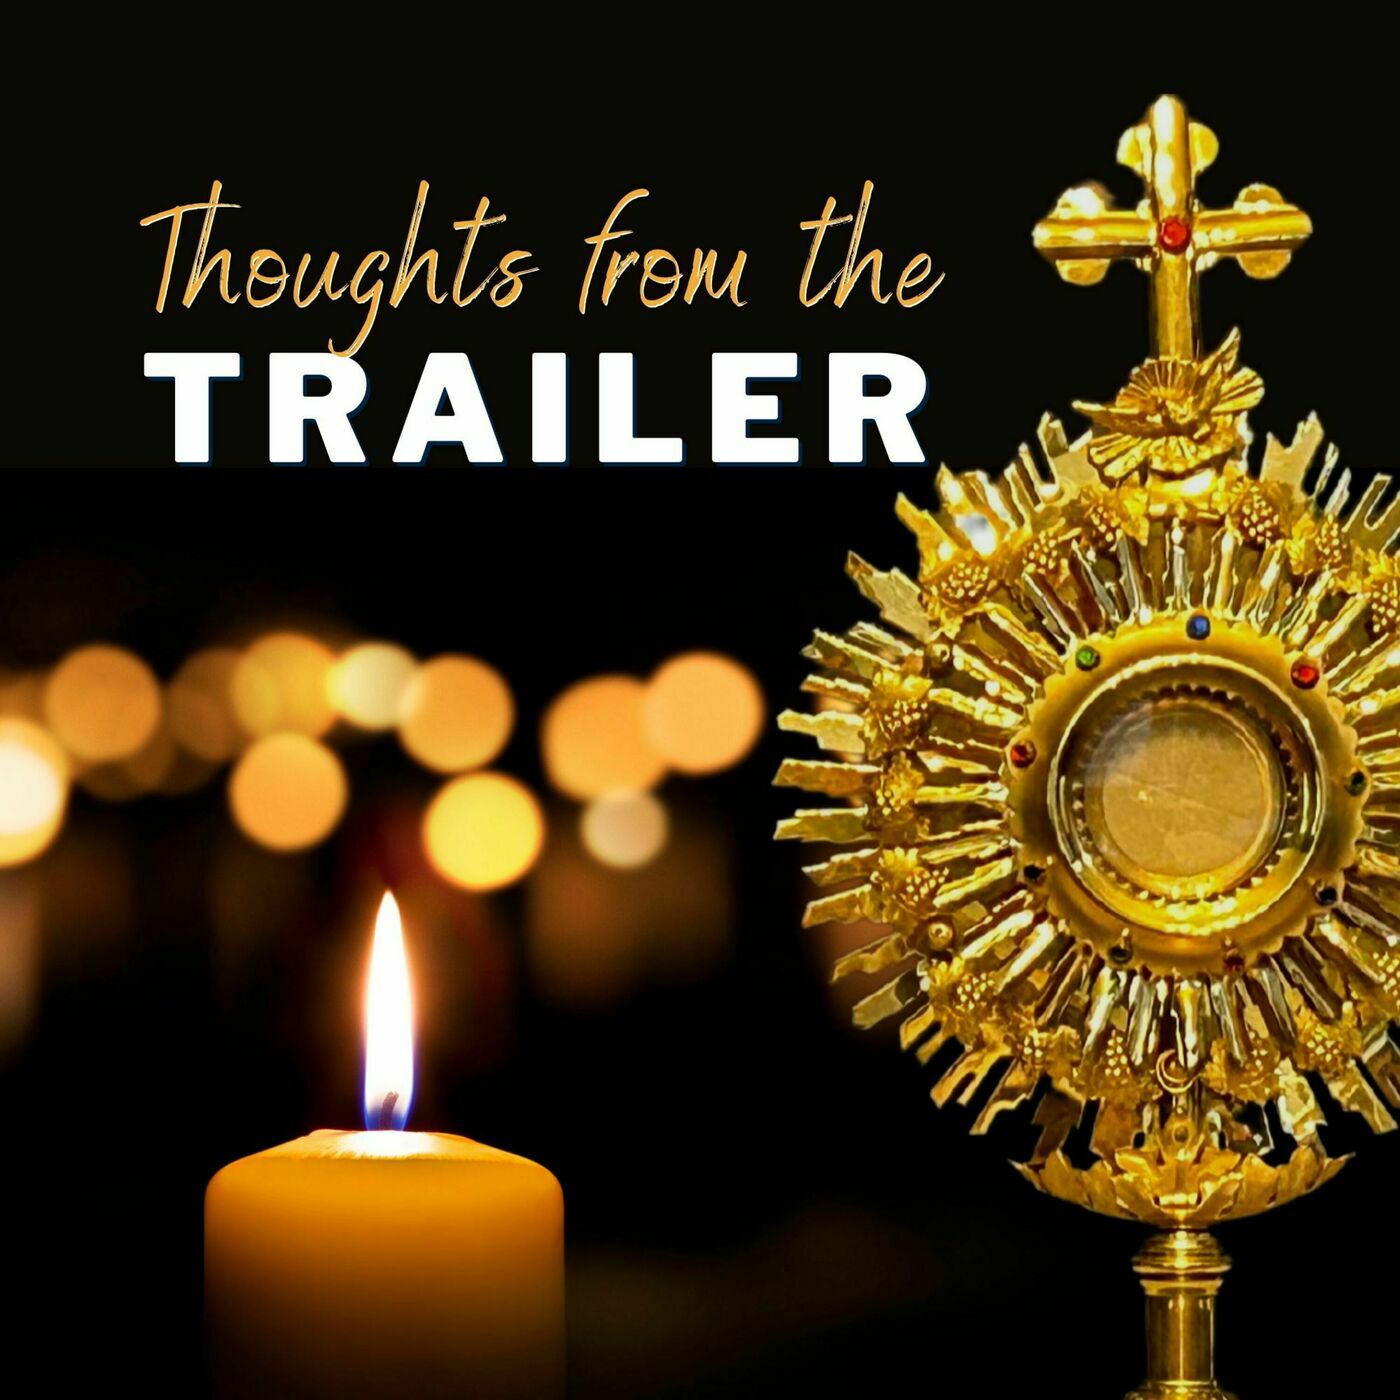 Thoughts from the Trailer with Fr. John Riccardo 36: Who In The World Would Do This?